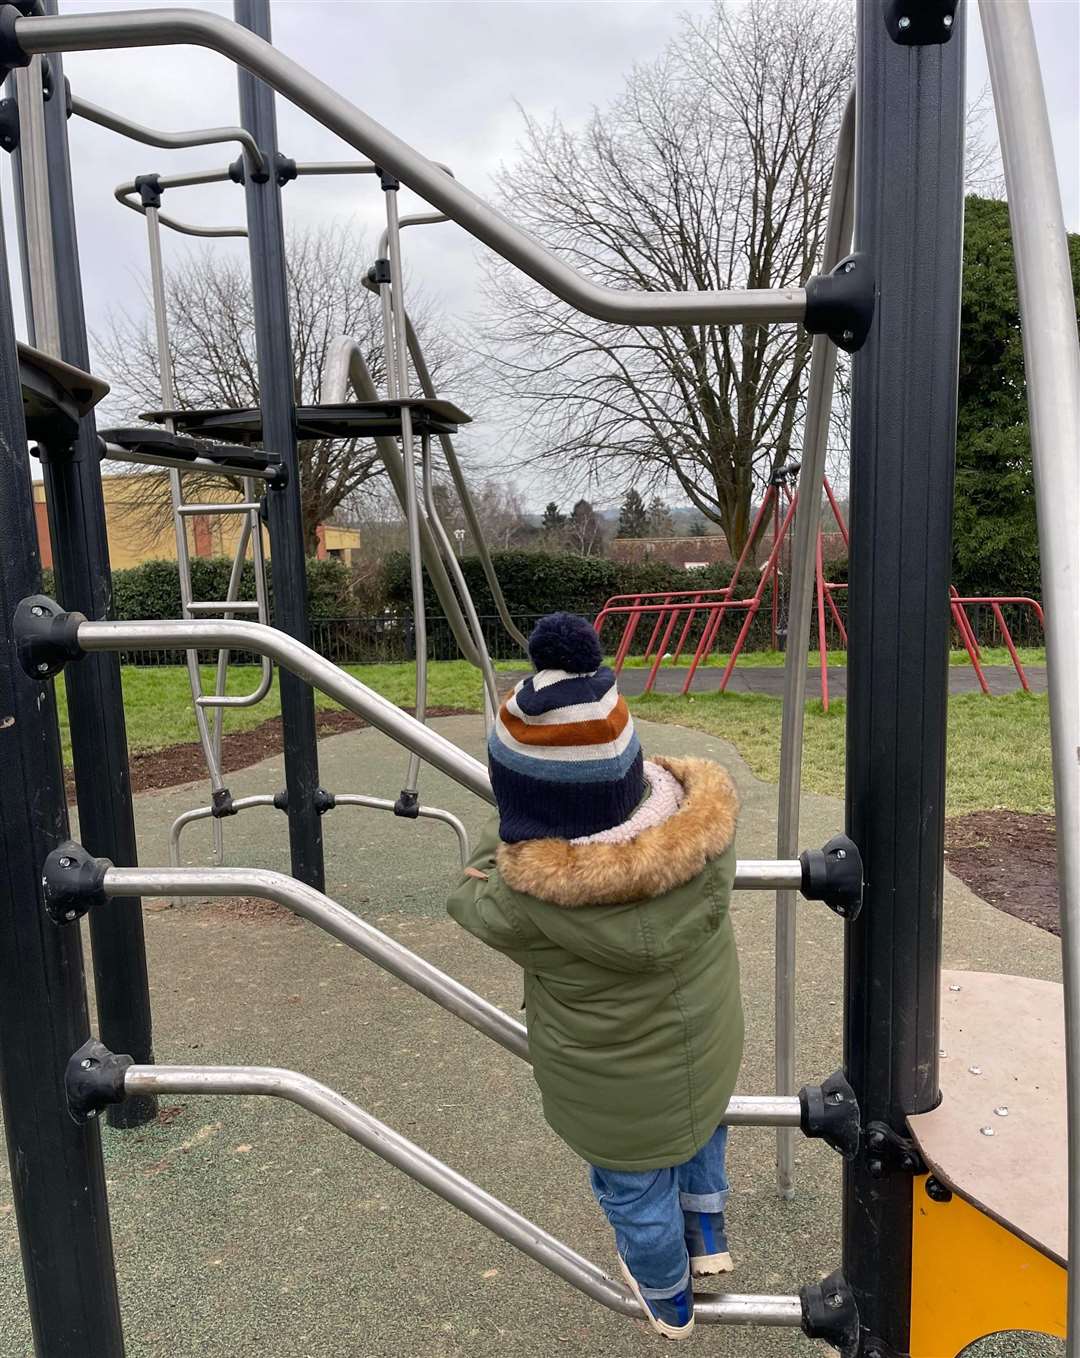 "He can’t reach the next level! Frustration all around." Sarah Yockney says her grandson struggles to use the equipment. Picture: Sarah Yockney